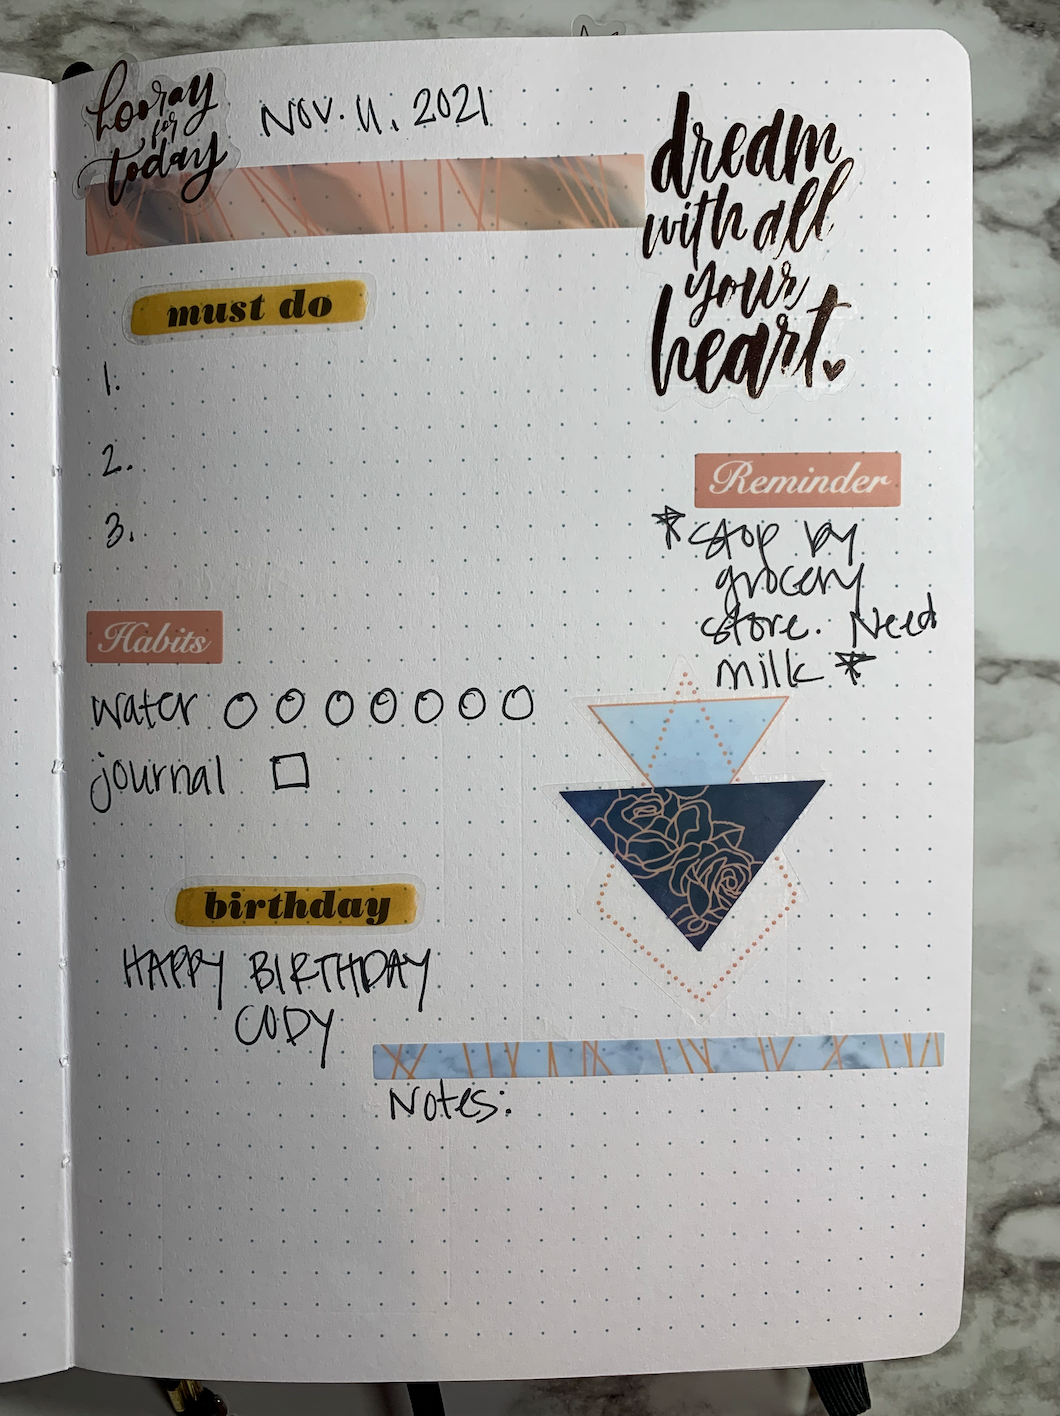 10+ Ideas For Bullet Journal Dailies, Daily Planning In Your Bullet  Journal